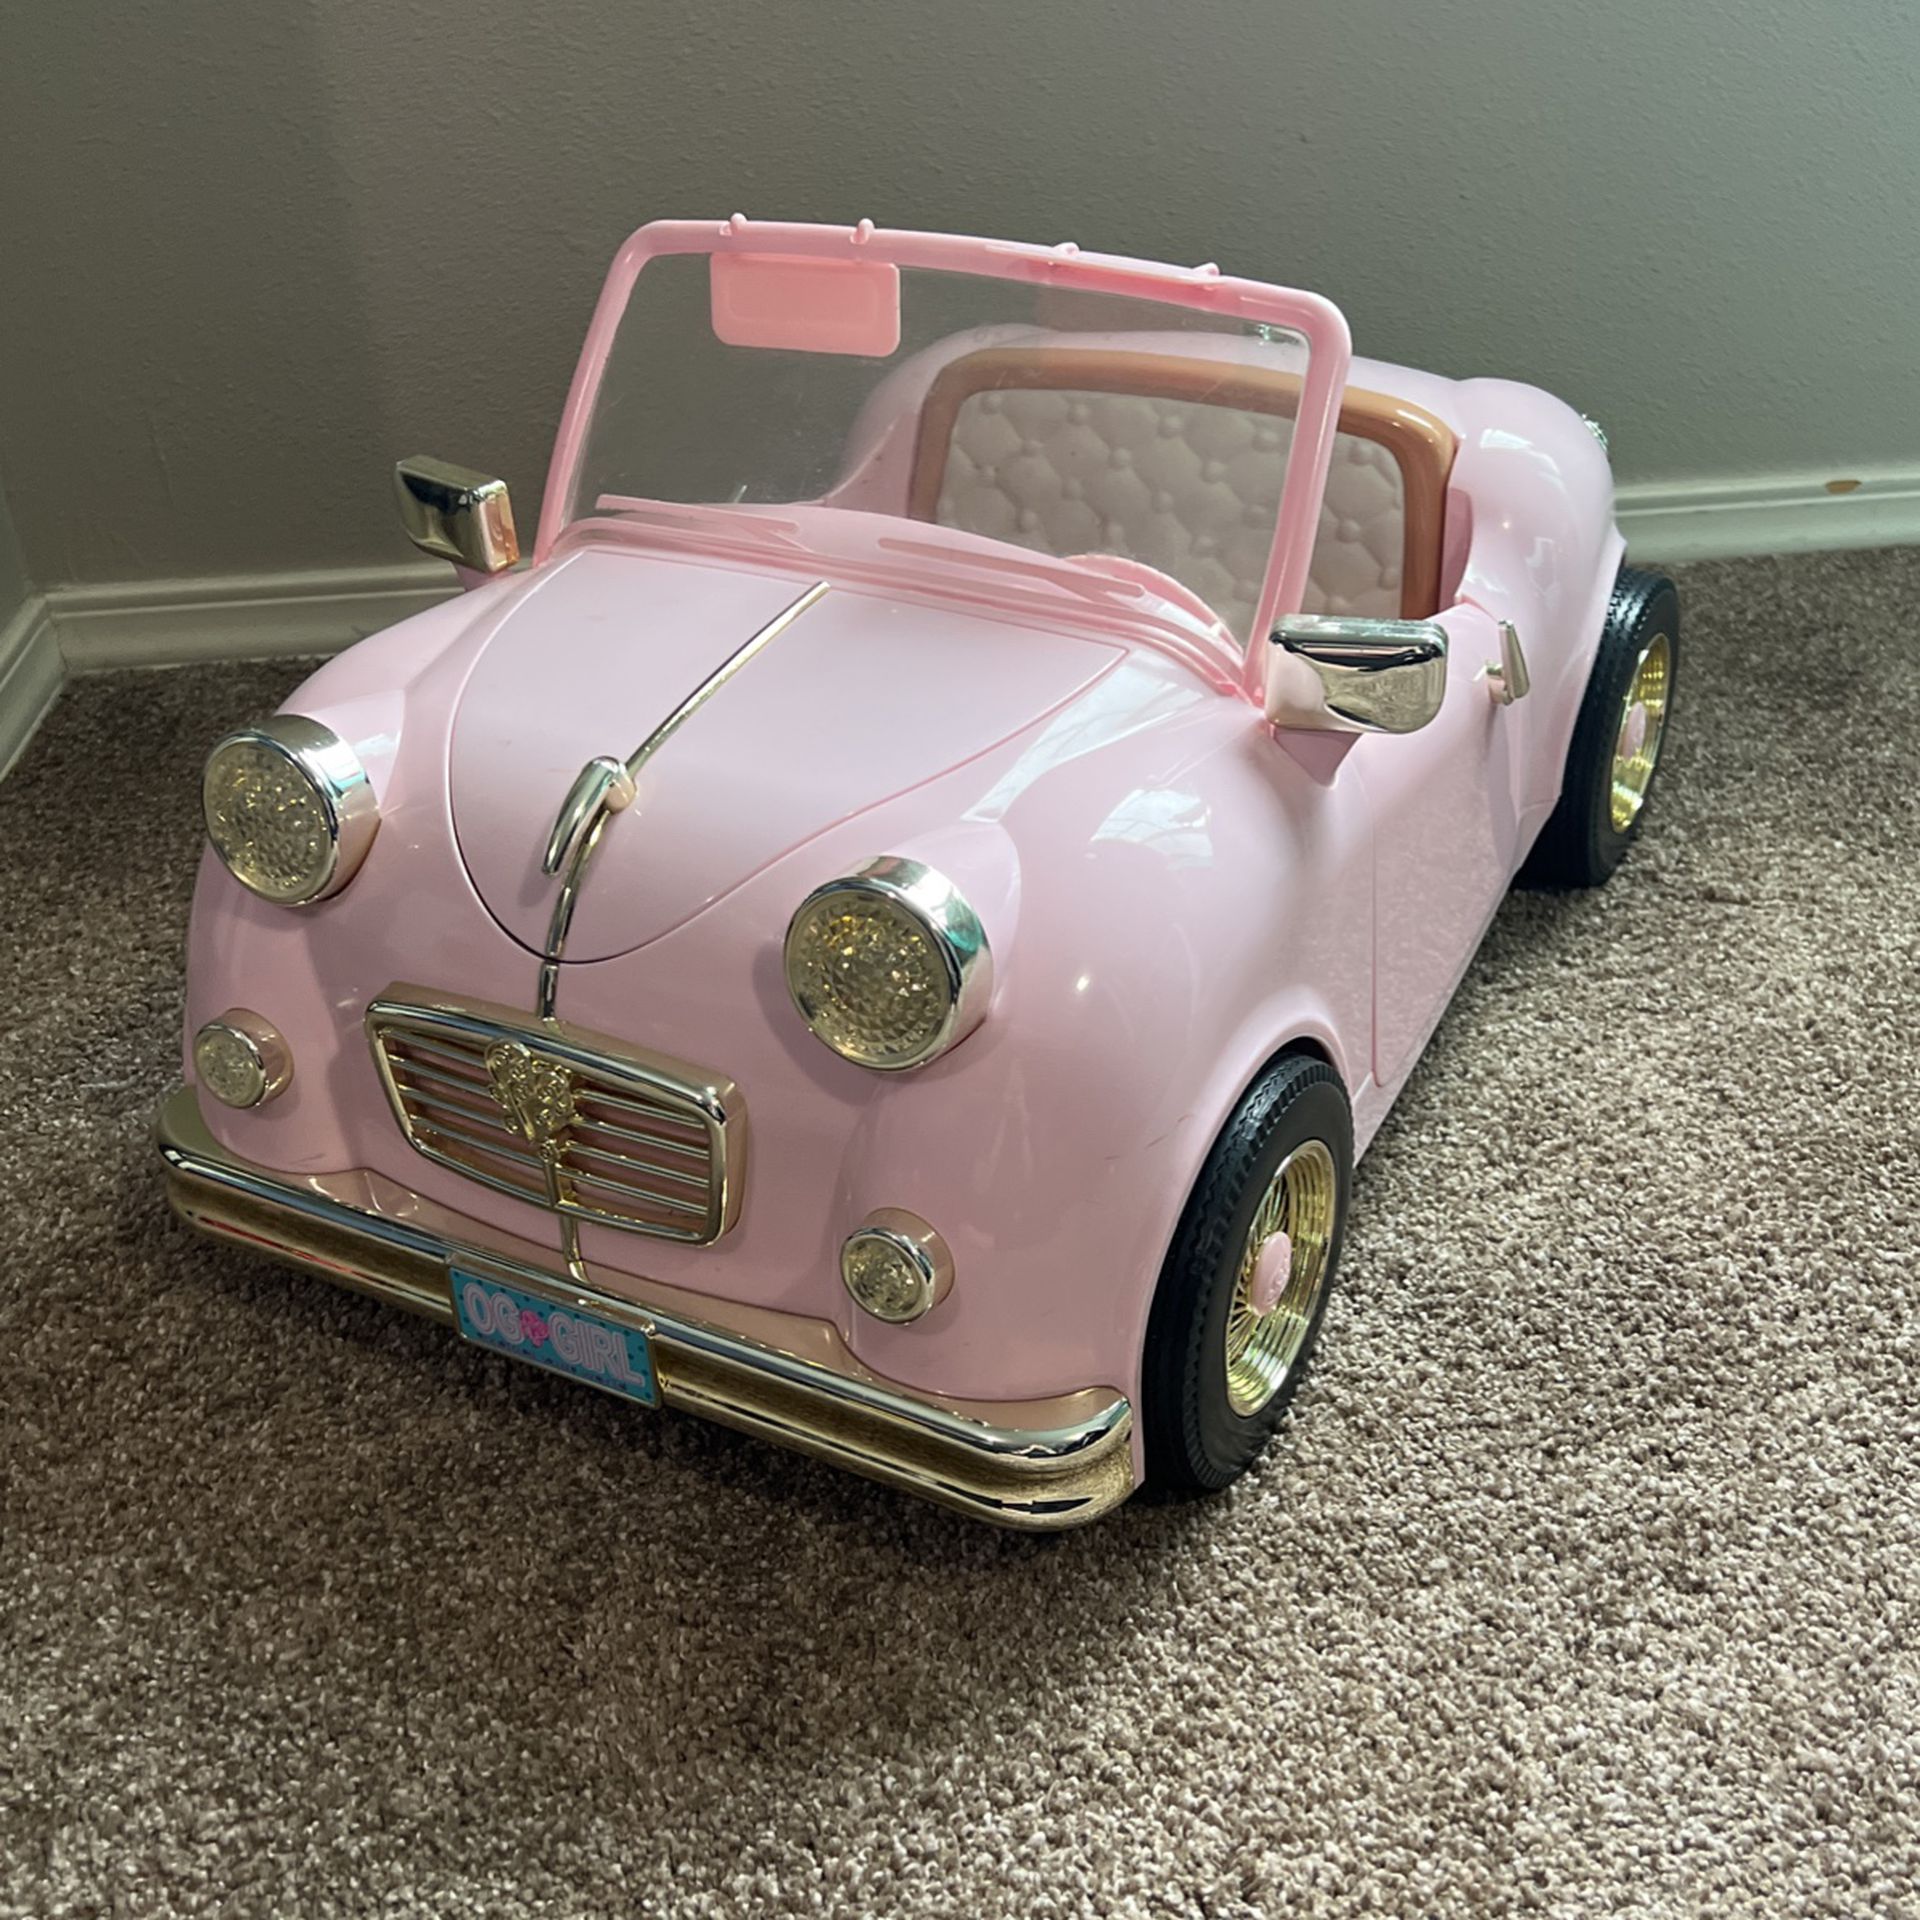 Our Generation Doll Car!!!